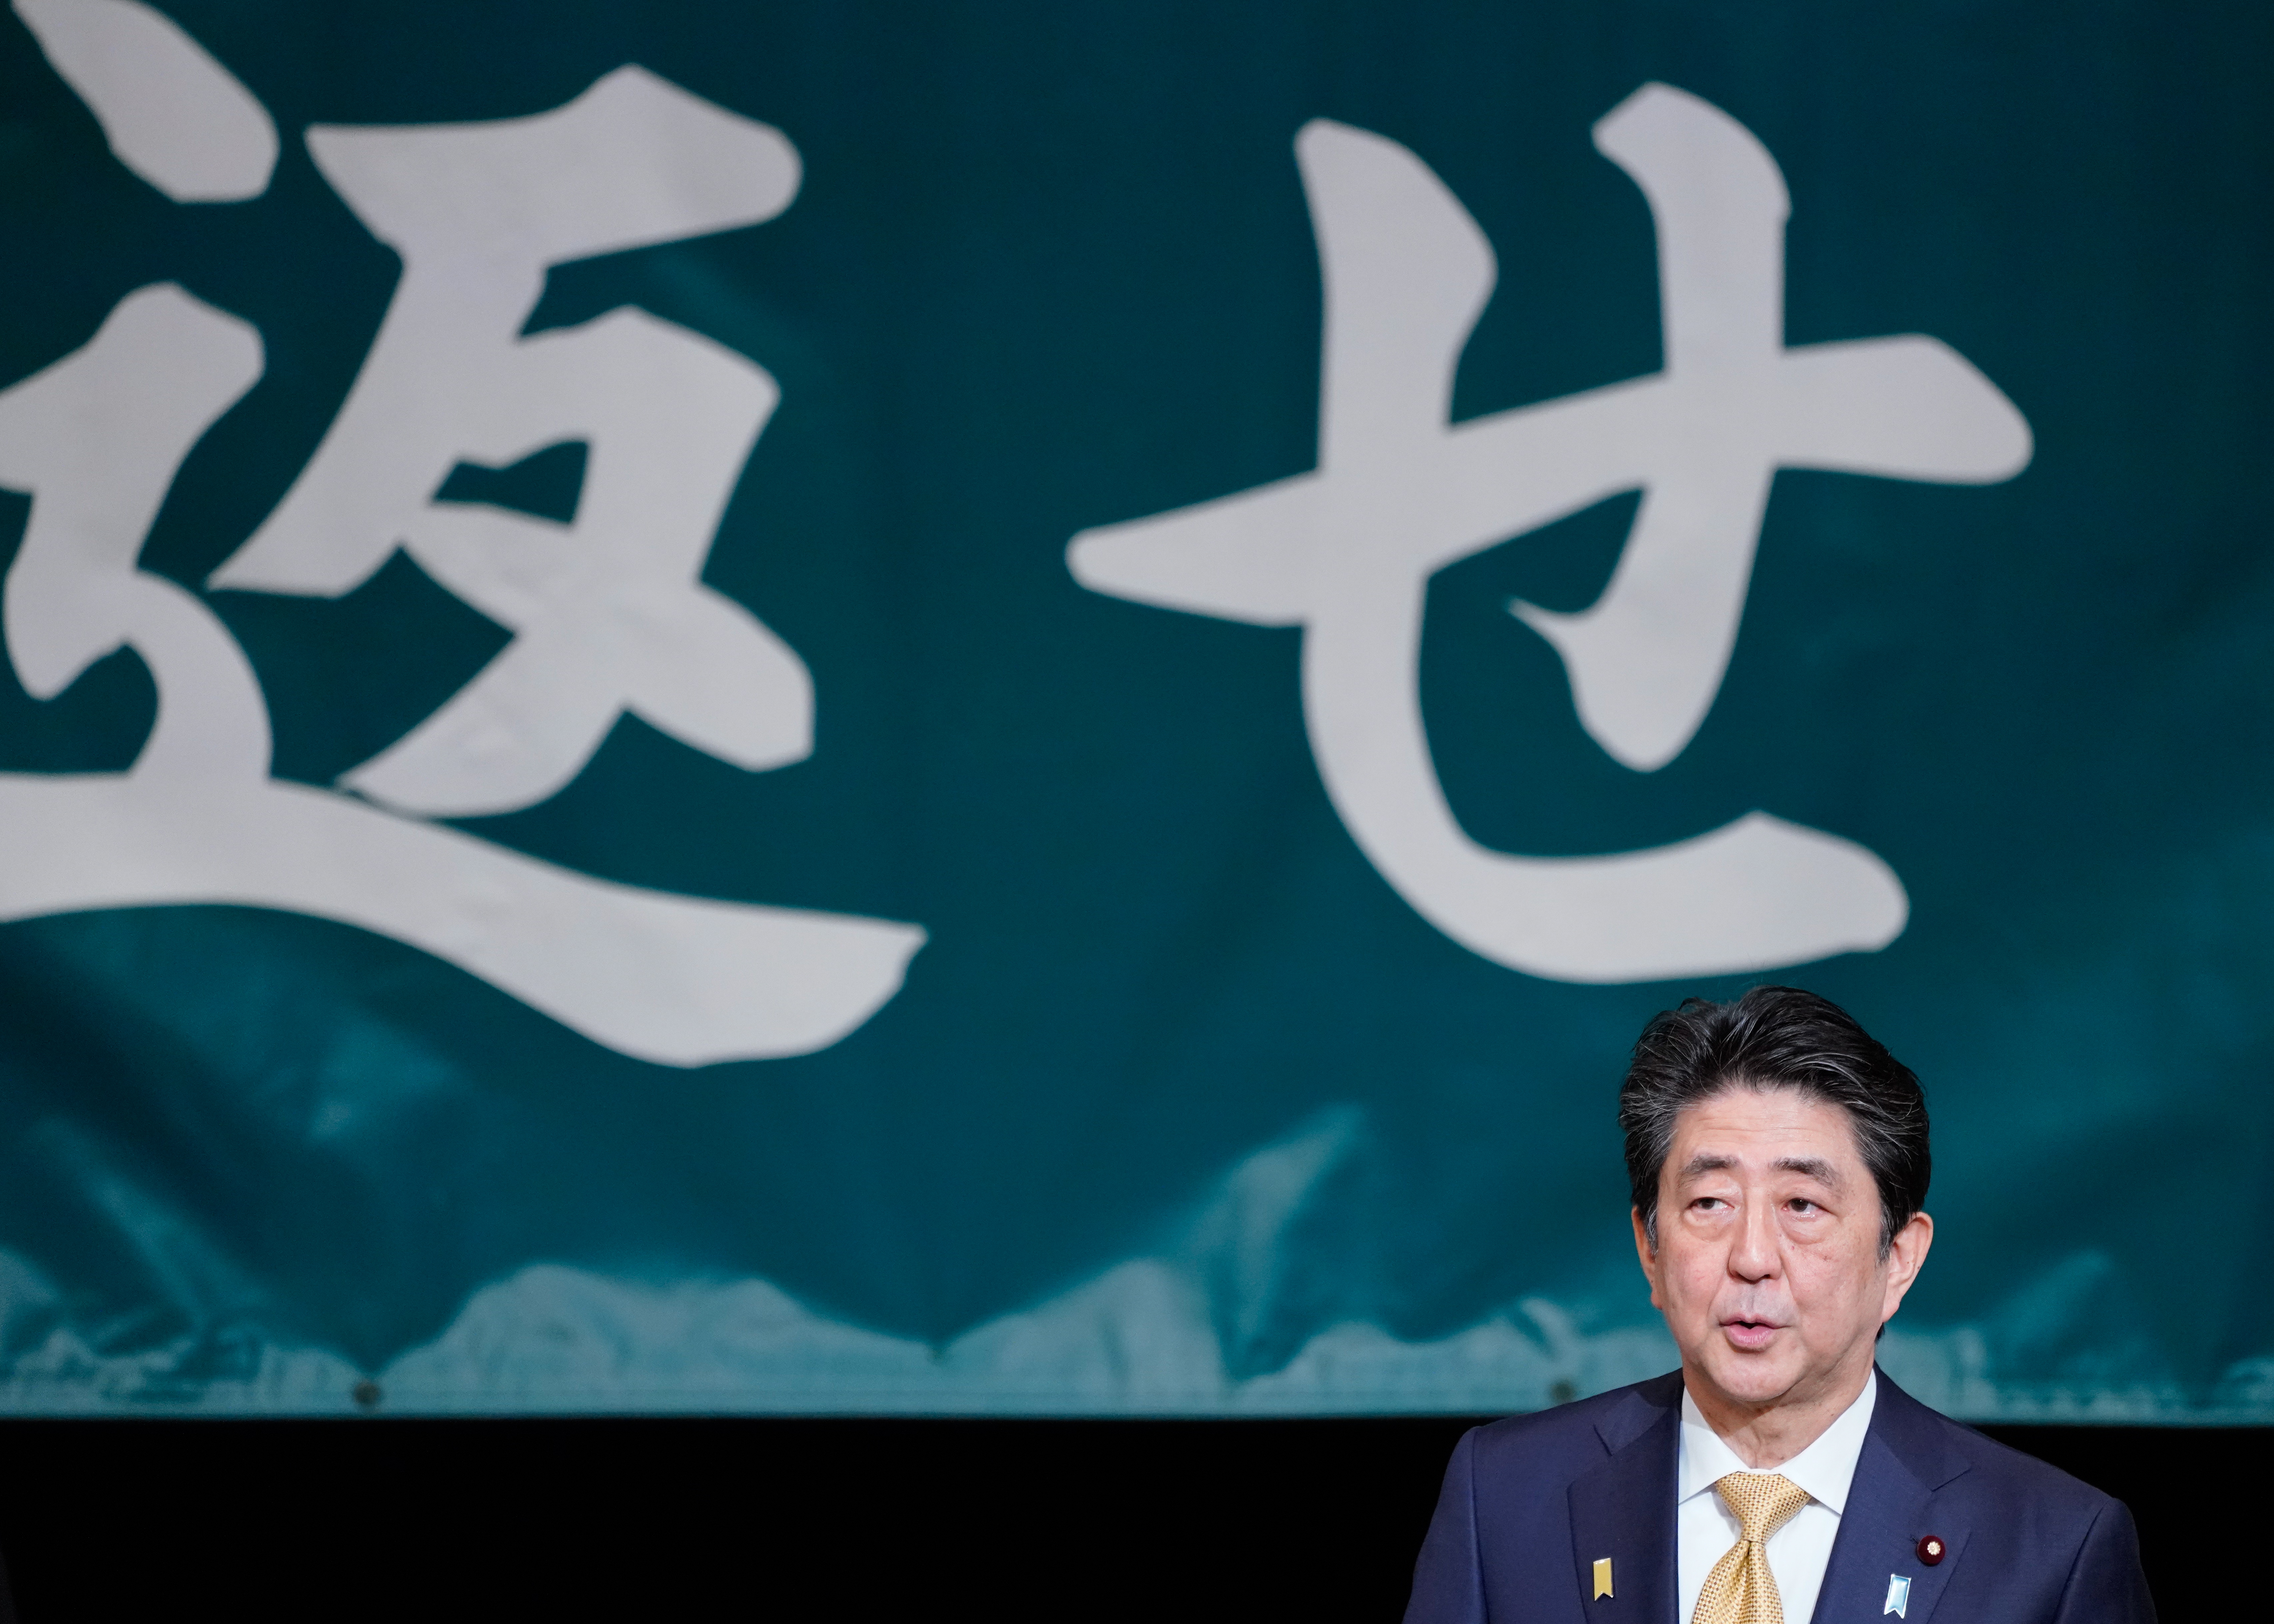 epa07349205 Japan's Prime Minister Shinzo Abe delivers a speech during a rally calling for the return of all four Russian-held islands located off Japan's northern island of Hokkaido, in Tokyo, Japan, 07 February 2019. The Northern Territories, as called by Japan, consists of four islands, Etorofu, Kunashiri, Shikotan and Habomai. They are known in Russia as the Southern Kuriles.  EPA/CHRISTOPHER JUE